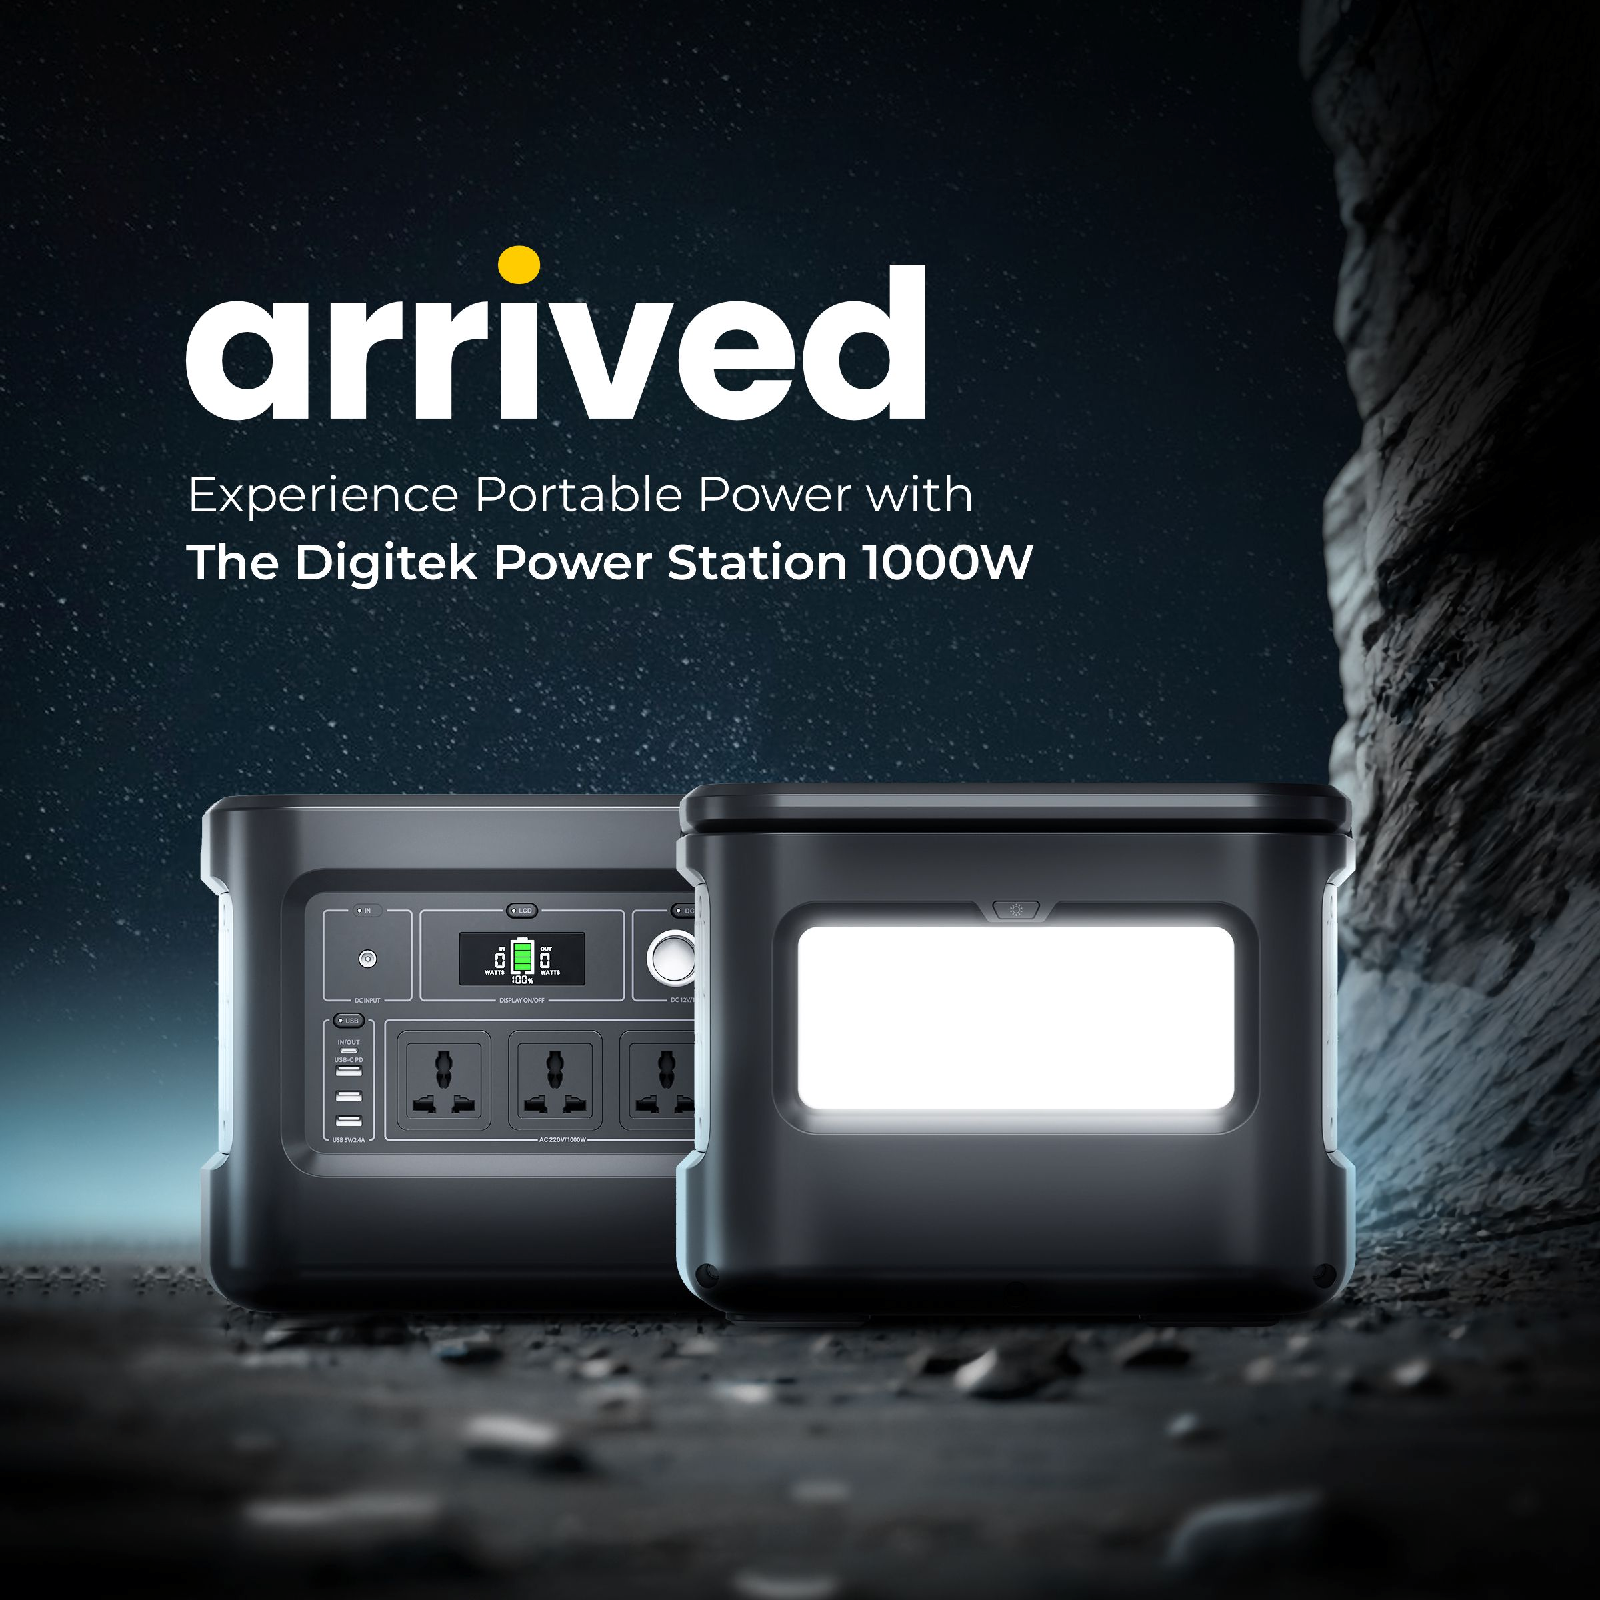 Digitek Power Station DPS 1000W/Portable AC/DC Power Station  Compatible with AC/DC Electronic Devices